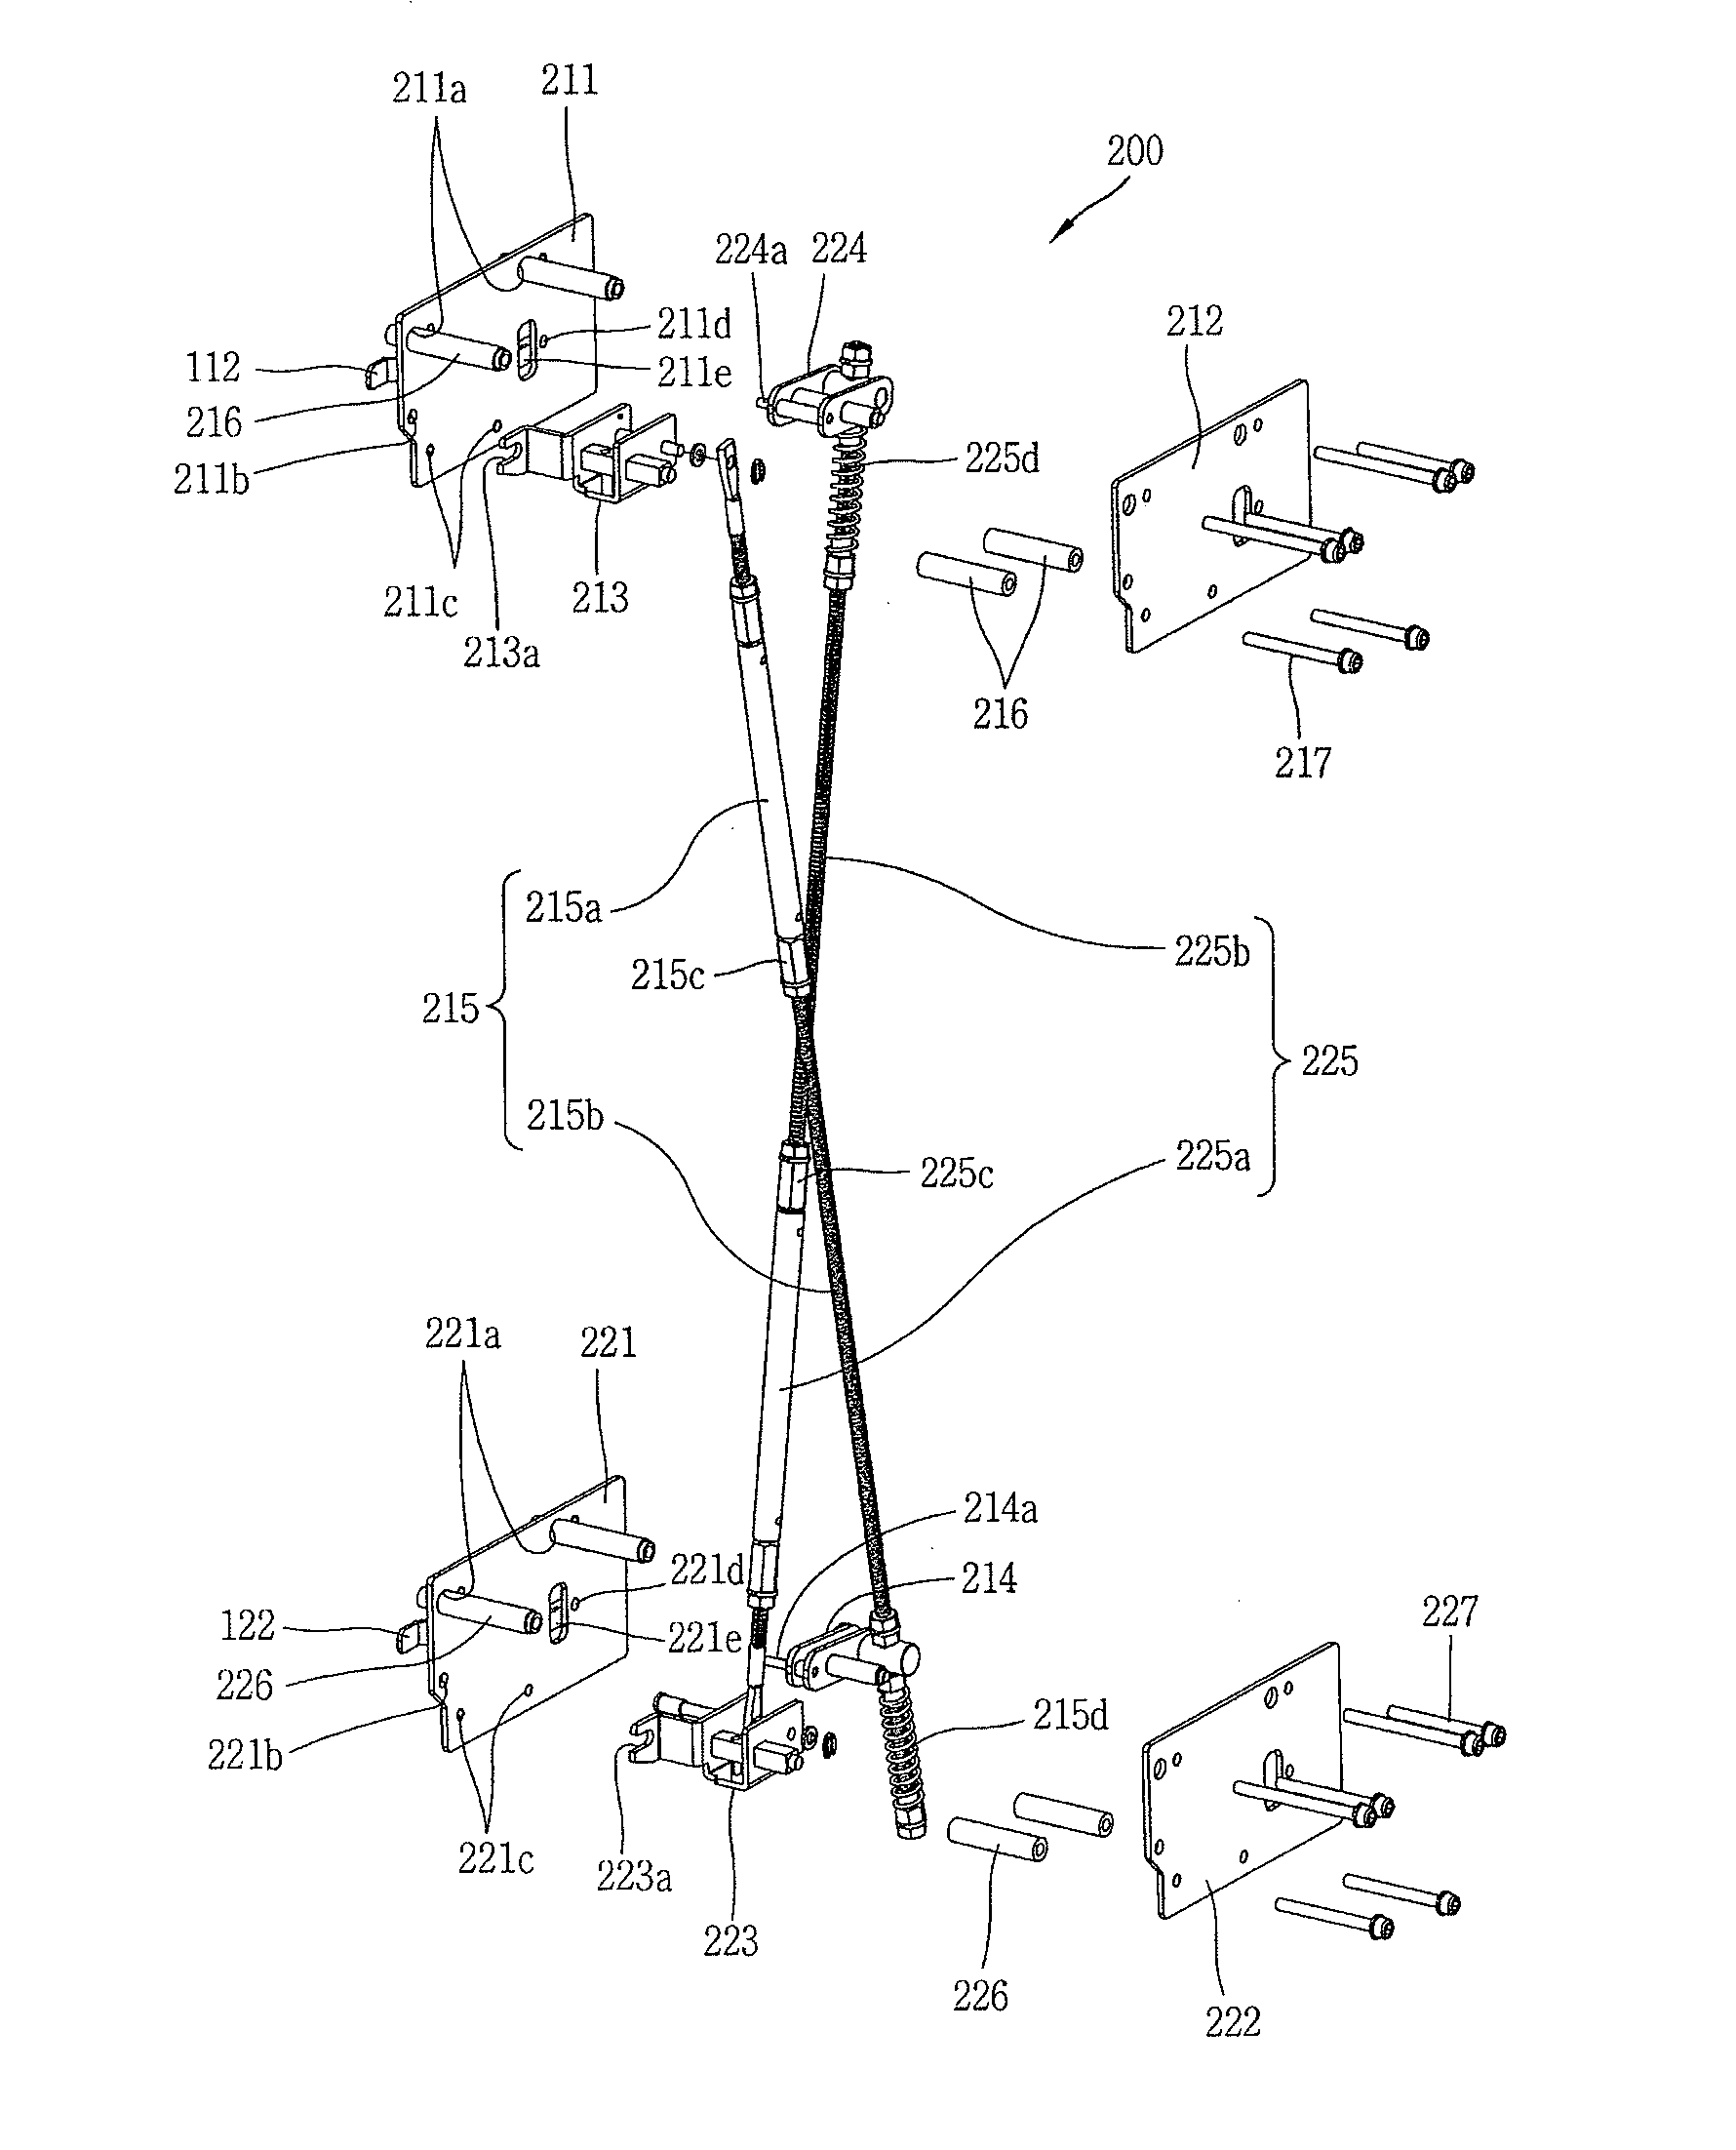 Transfer device for automatic transfer switch